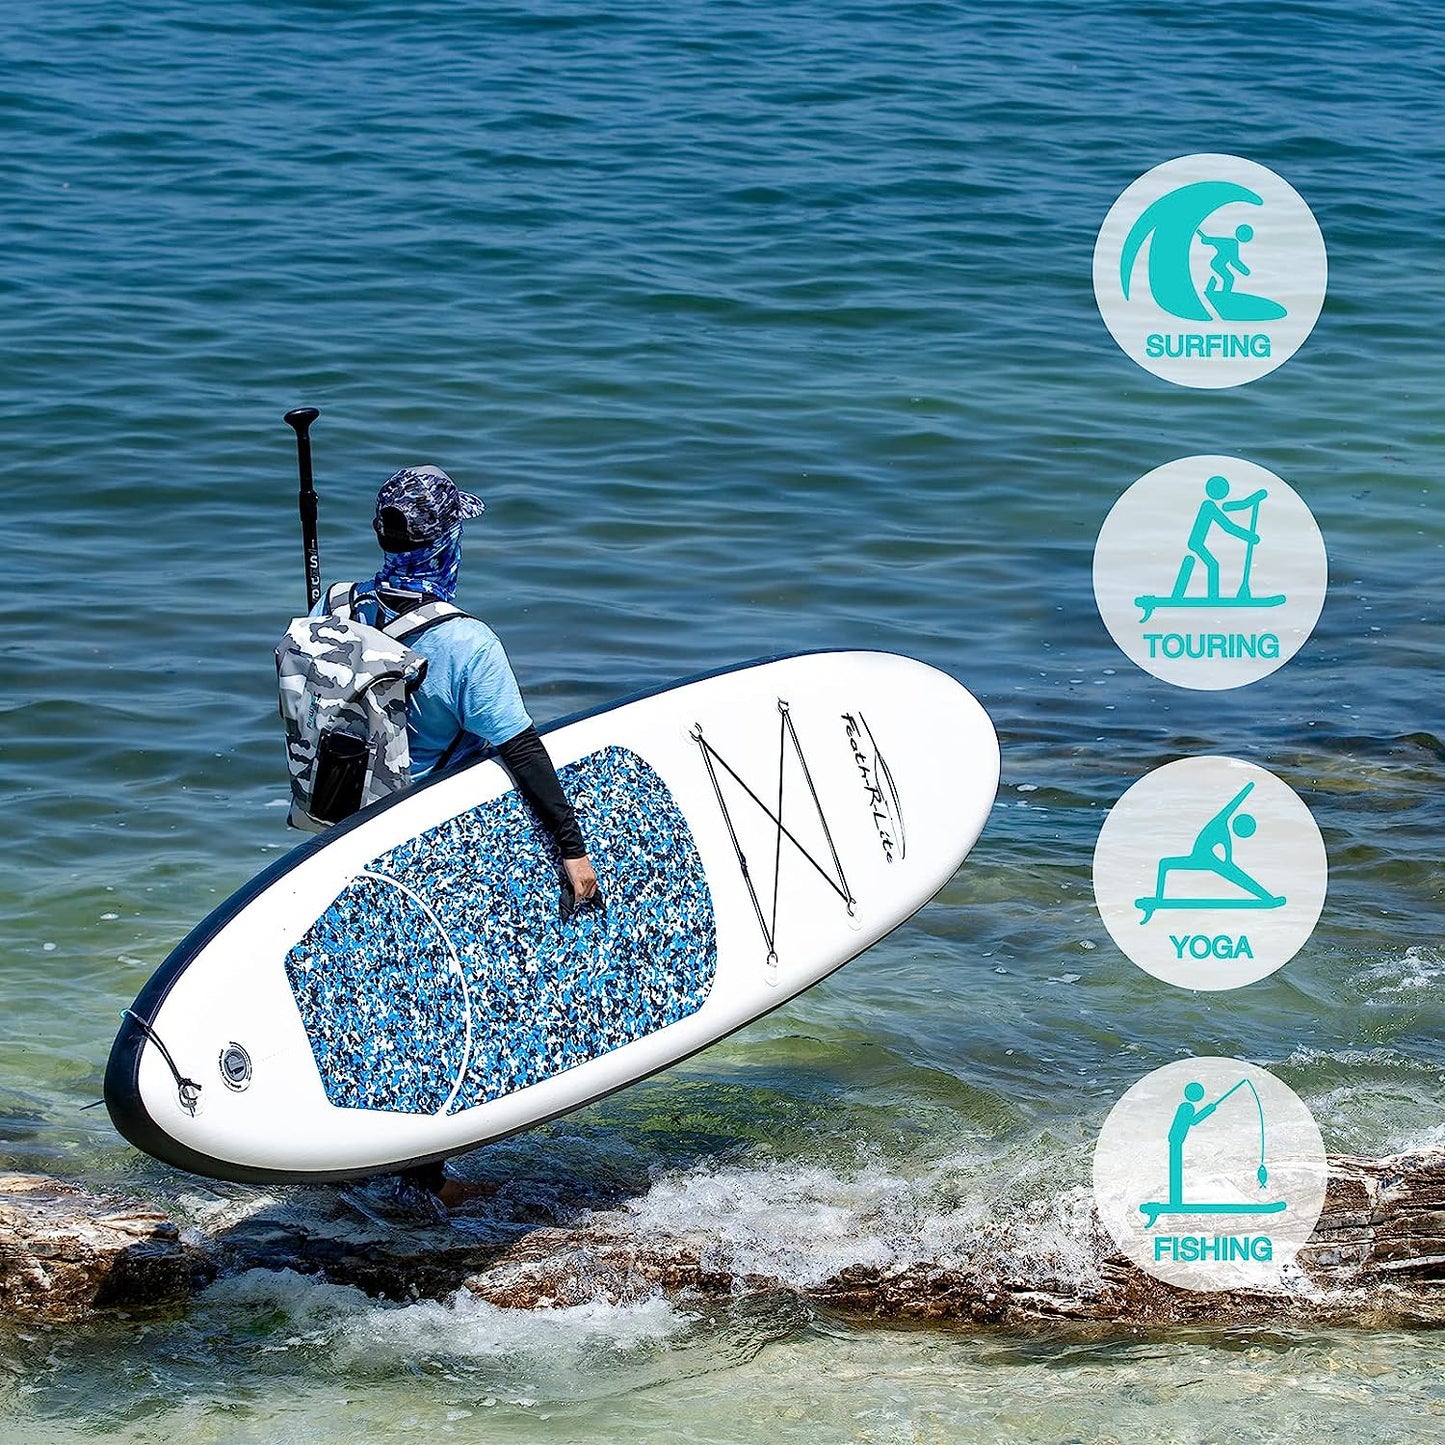  10'X30''X6'' Ultra-Light Inflatable Stand up Paddle Board with Complete Accessories Set: Paddleboard, Three Fins, Adjustable Paddle, Pump, Backpack, Leash, and Waterproof Phone Bag